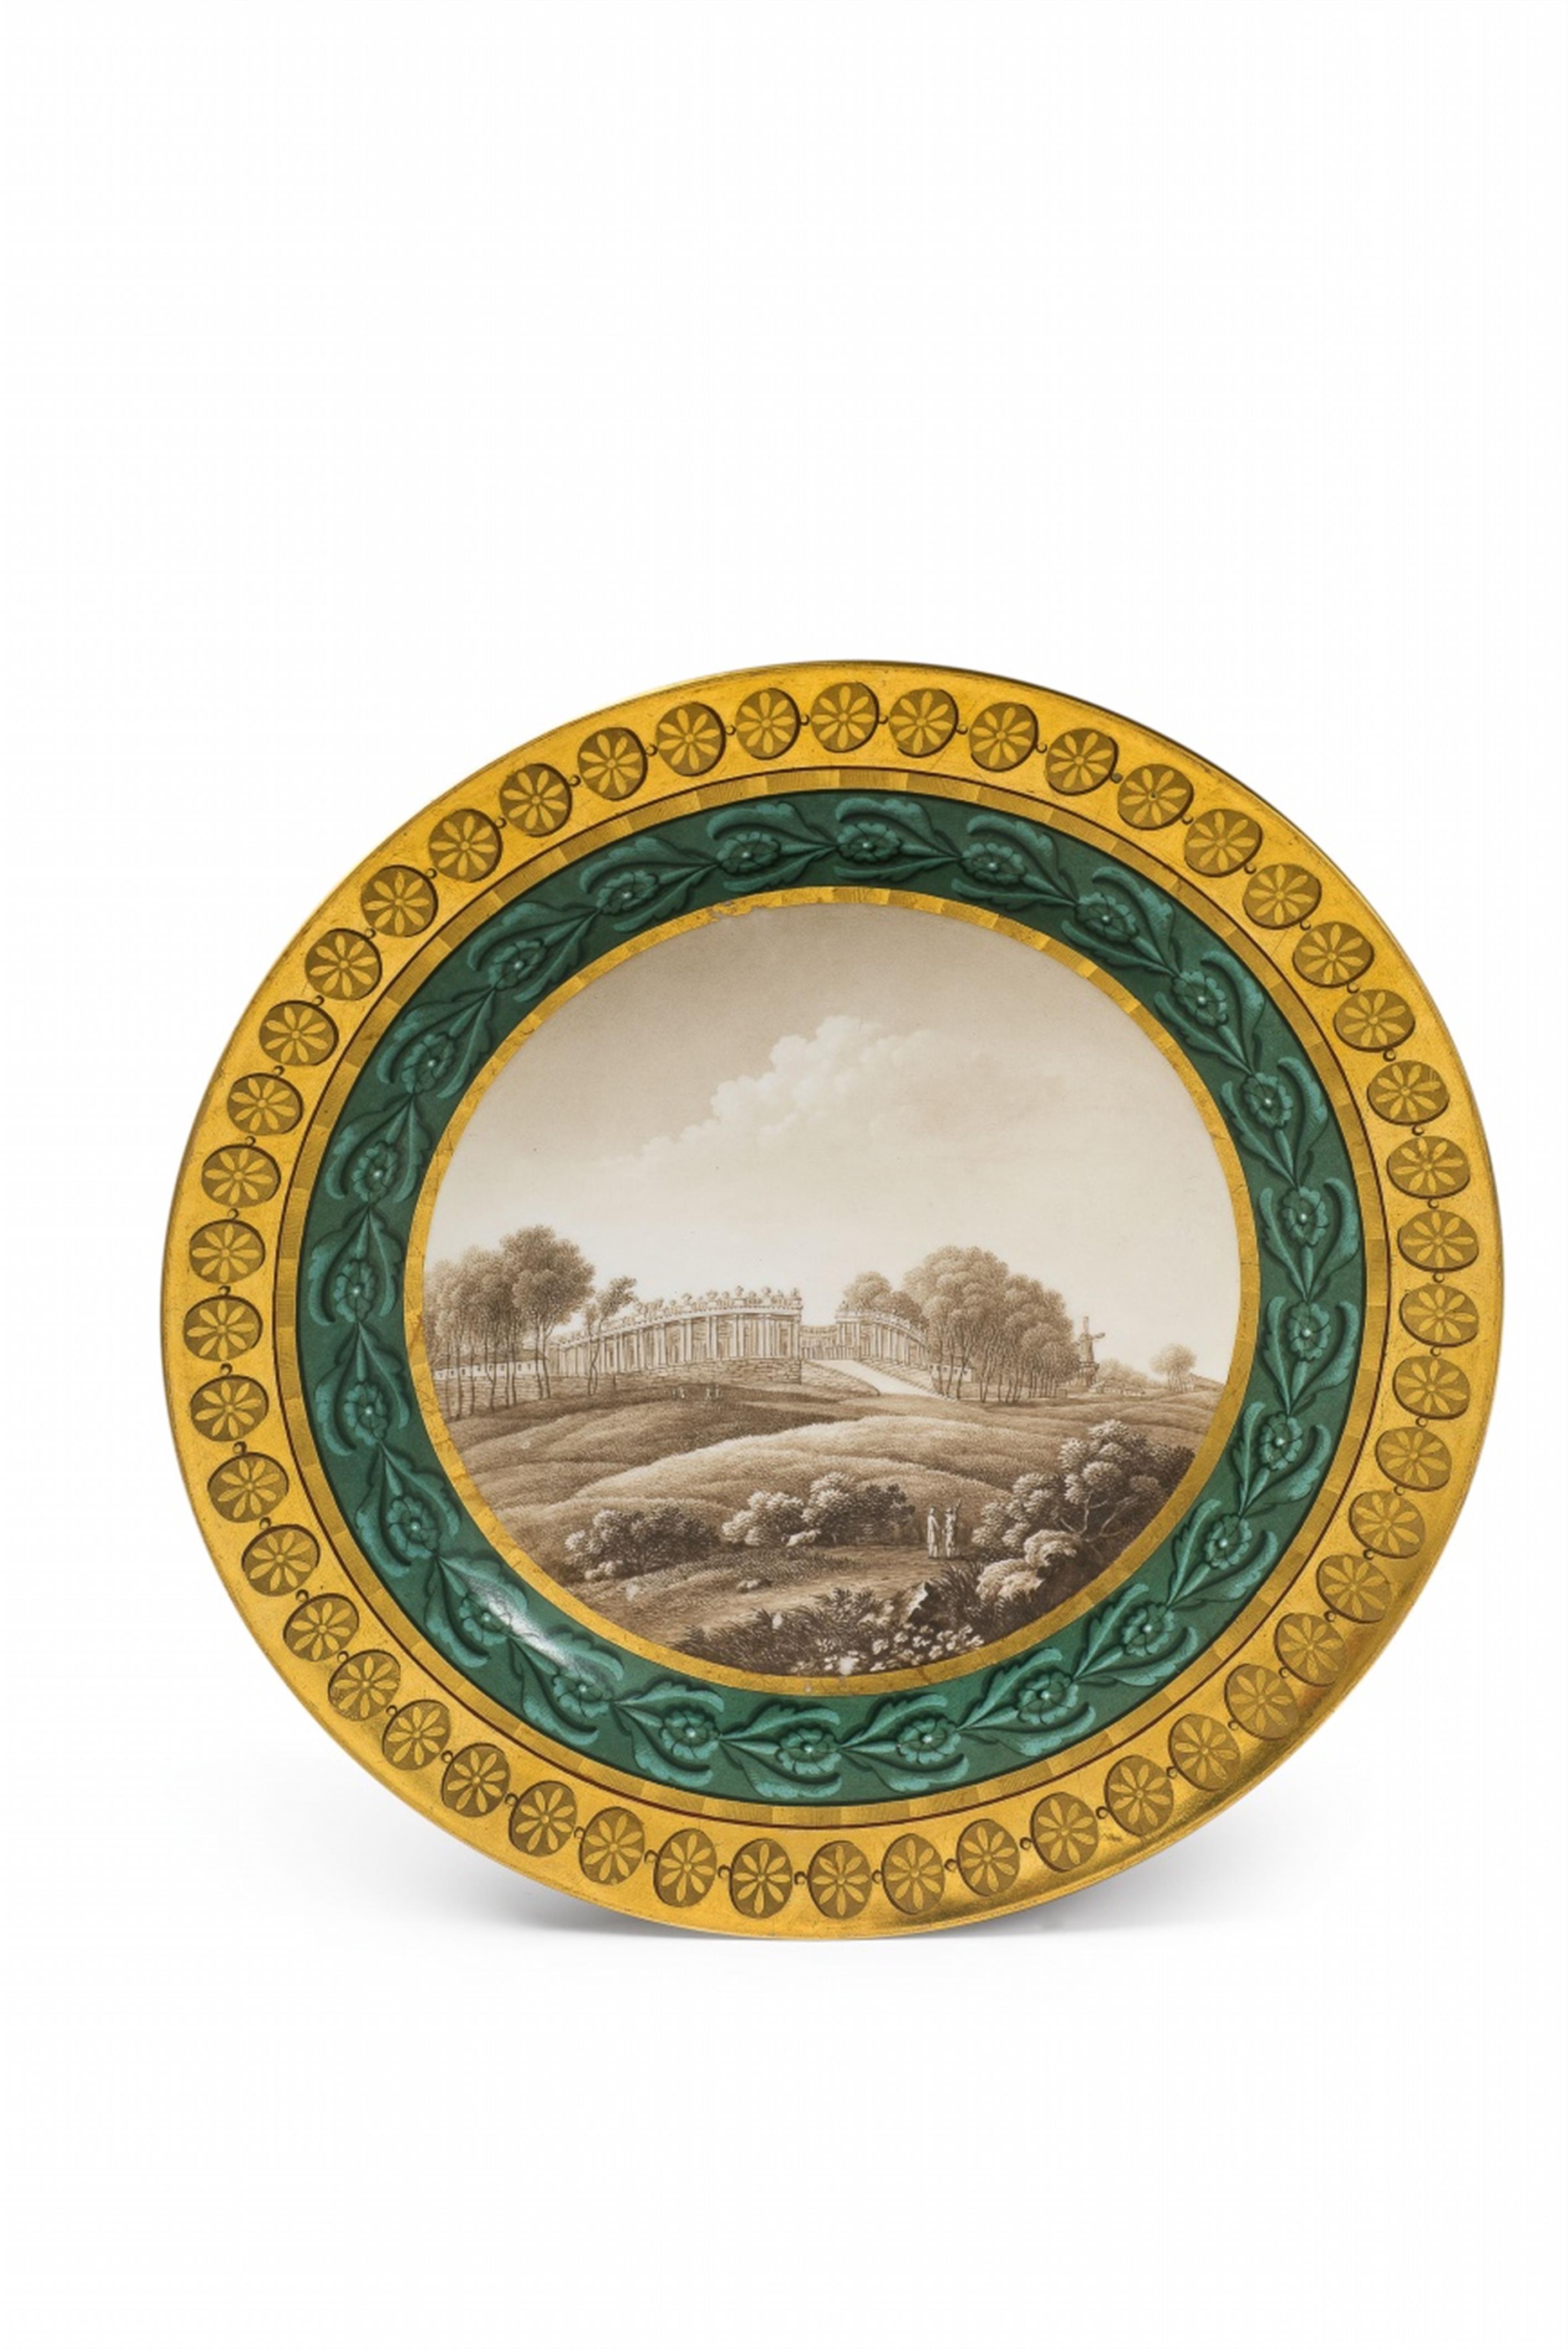 A Berlin KPM porcelain plate with a view of the colonnades at Sanssouci - image-1